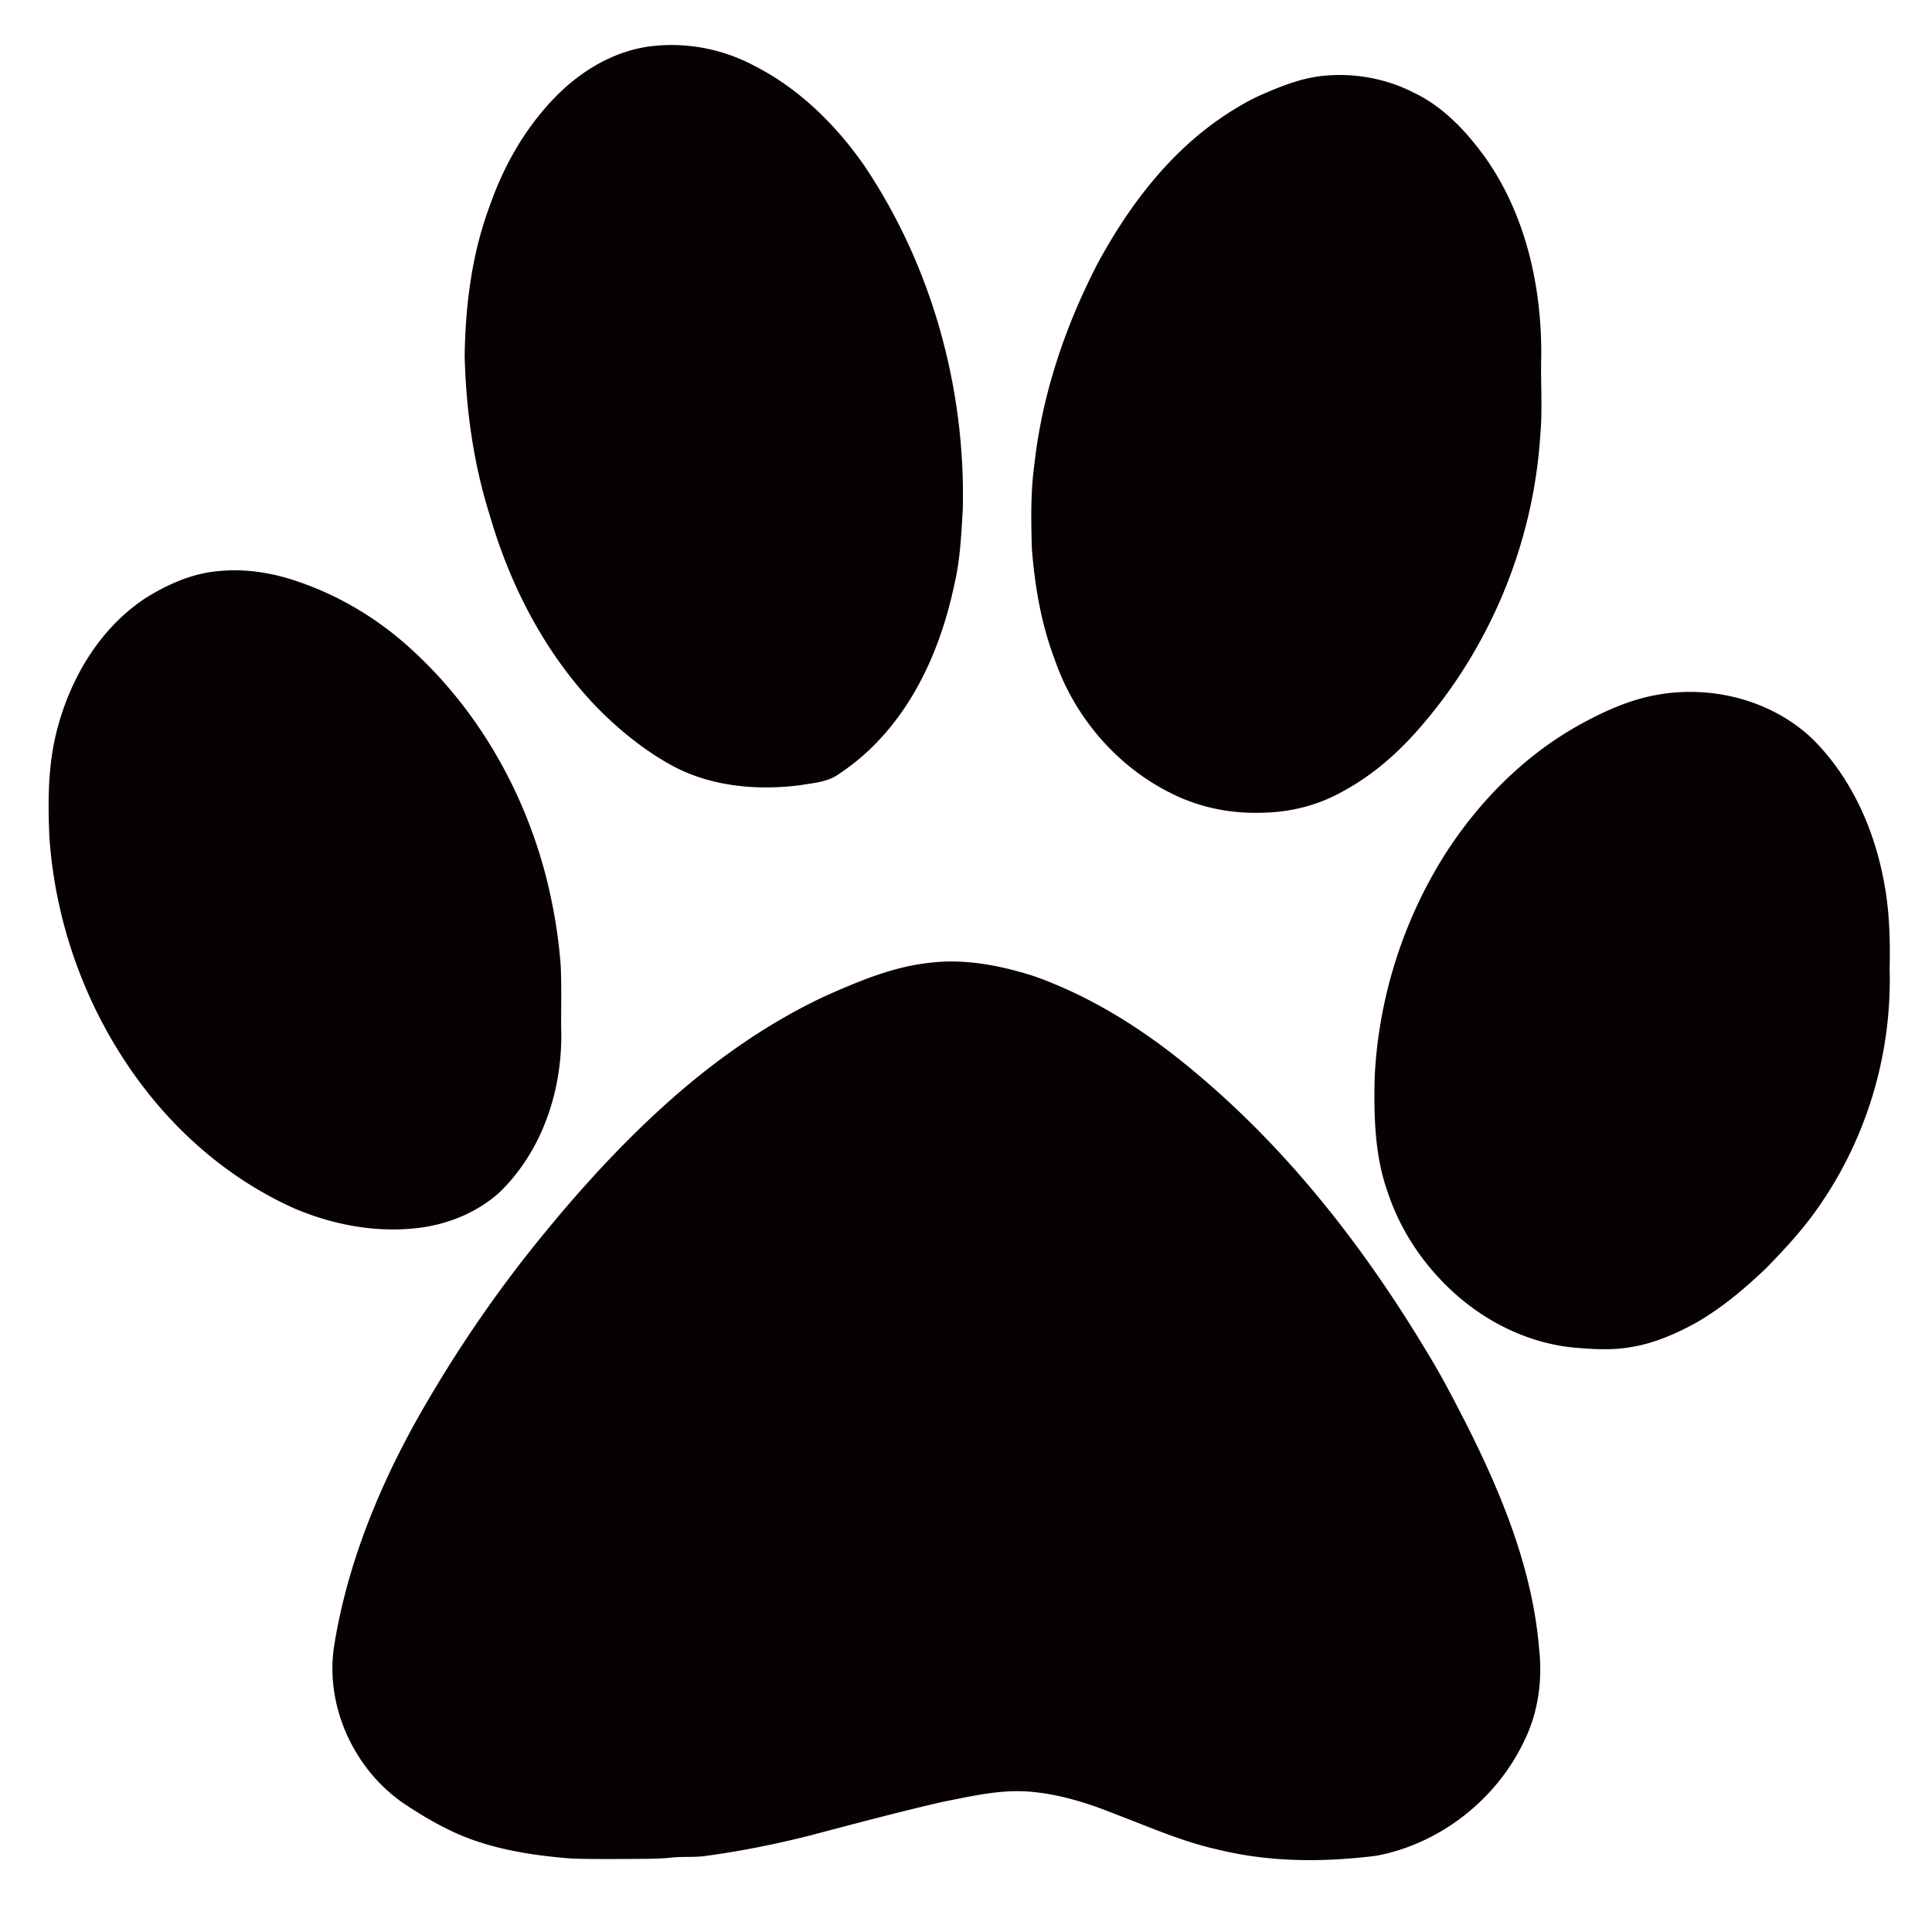 Clipart dog paw print clipart